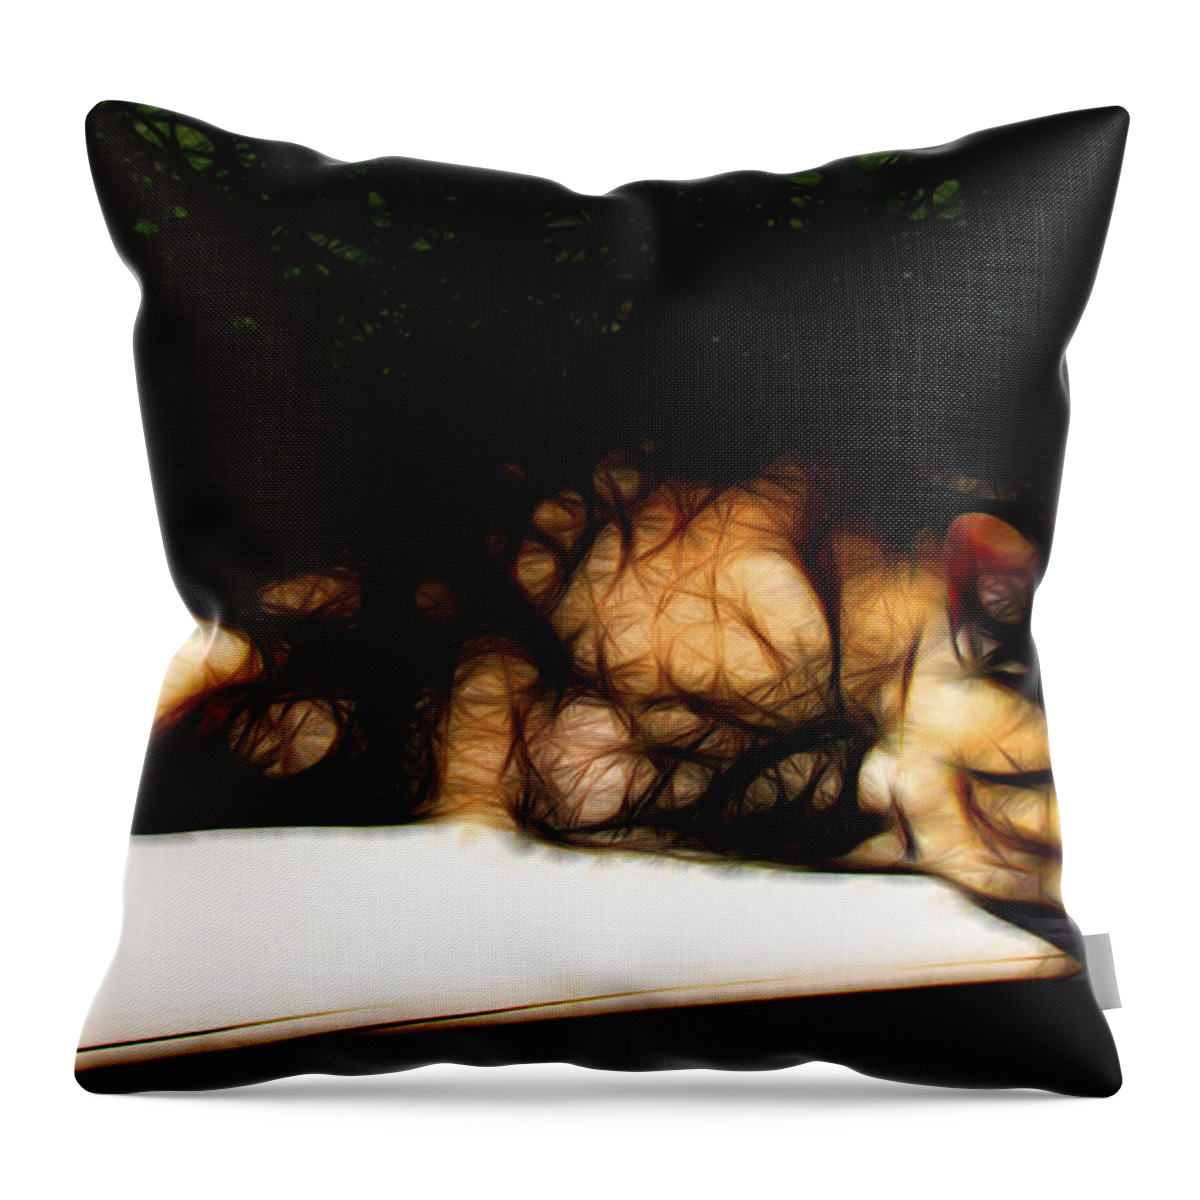 Nature Throw Pillow featuring the digital art Cat Nap 1 by William Horden